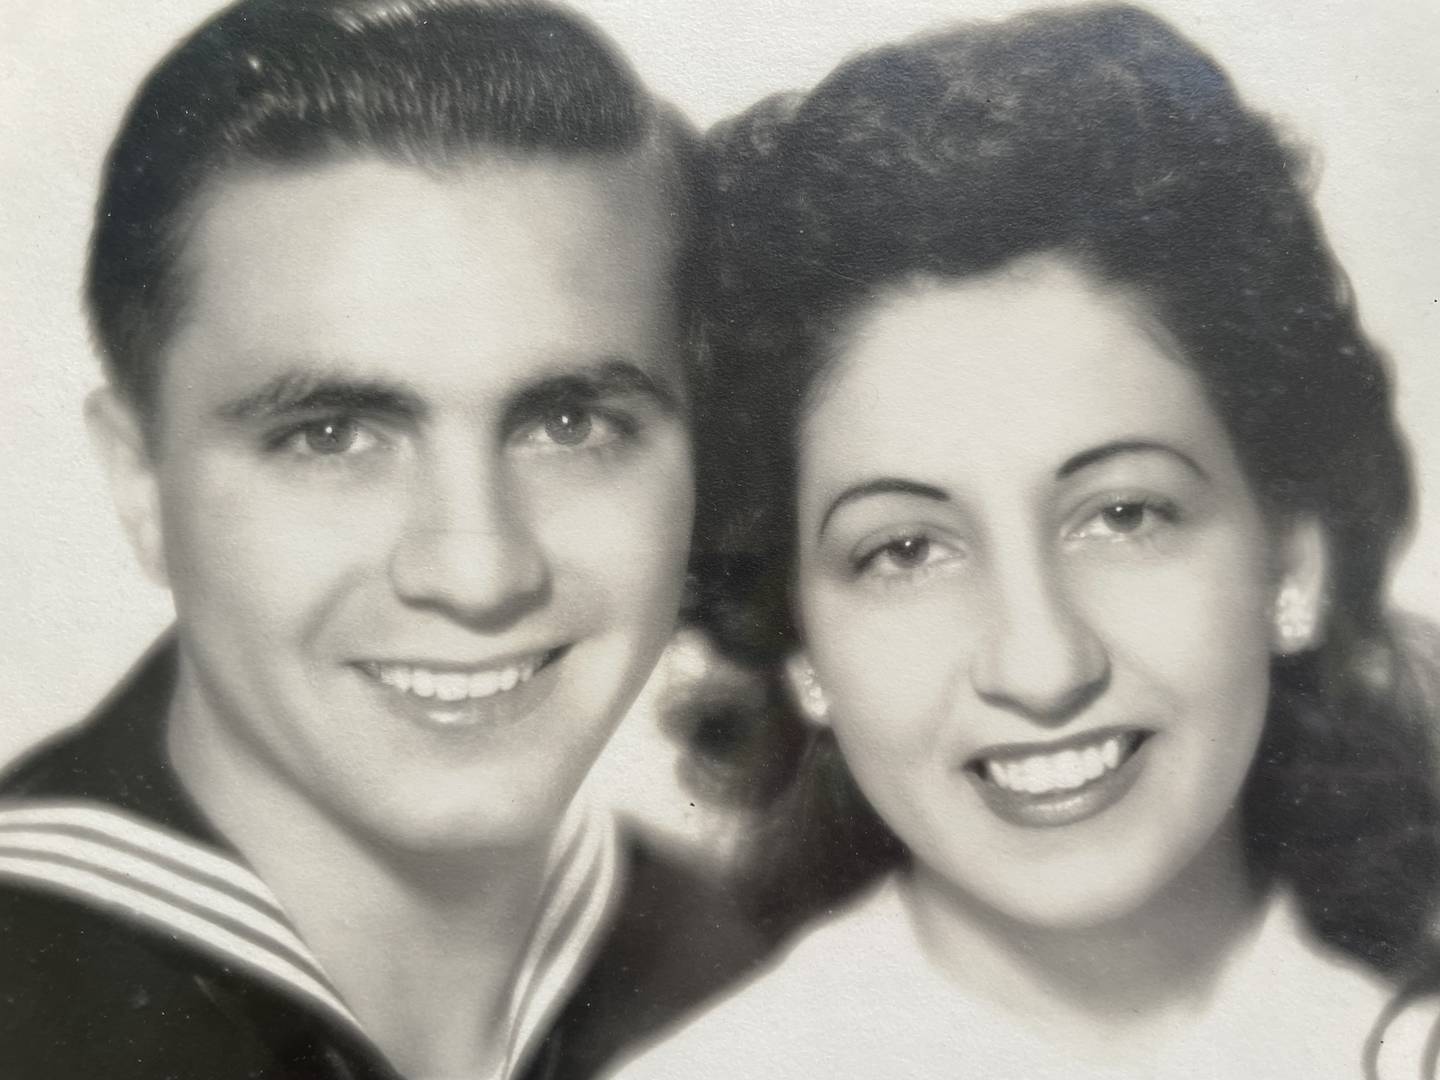 Daniel Obriot and his wife Alice in the 1940s